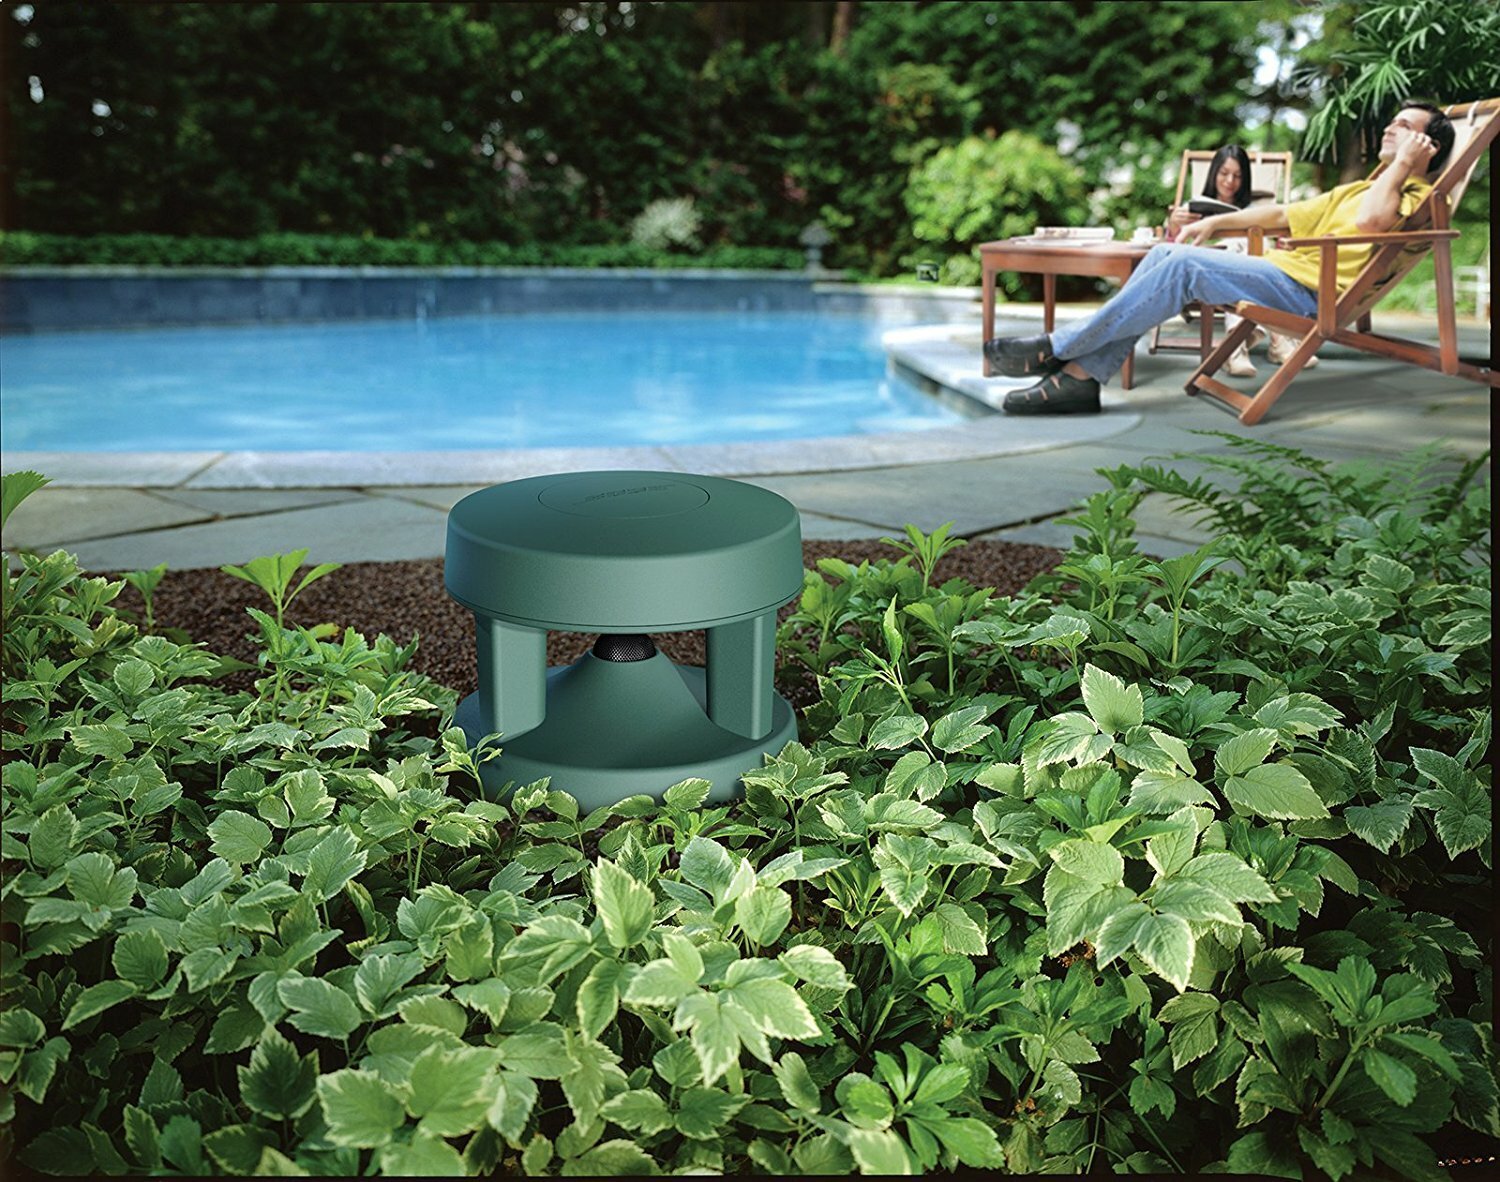 speaker in plants next to person lounging by the pool 